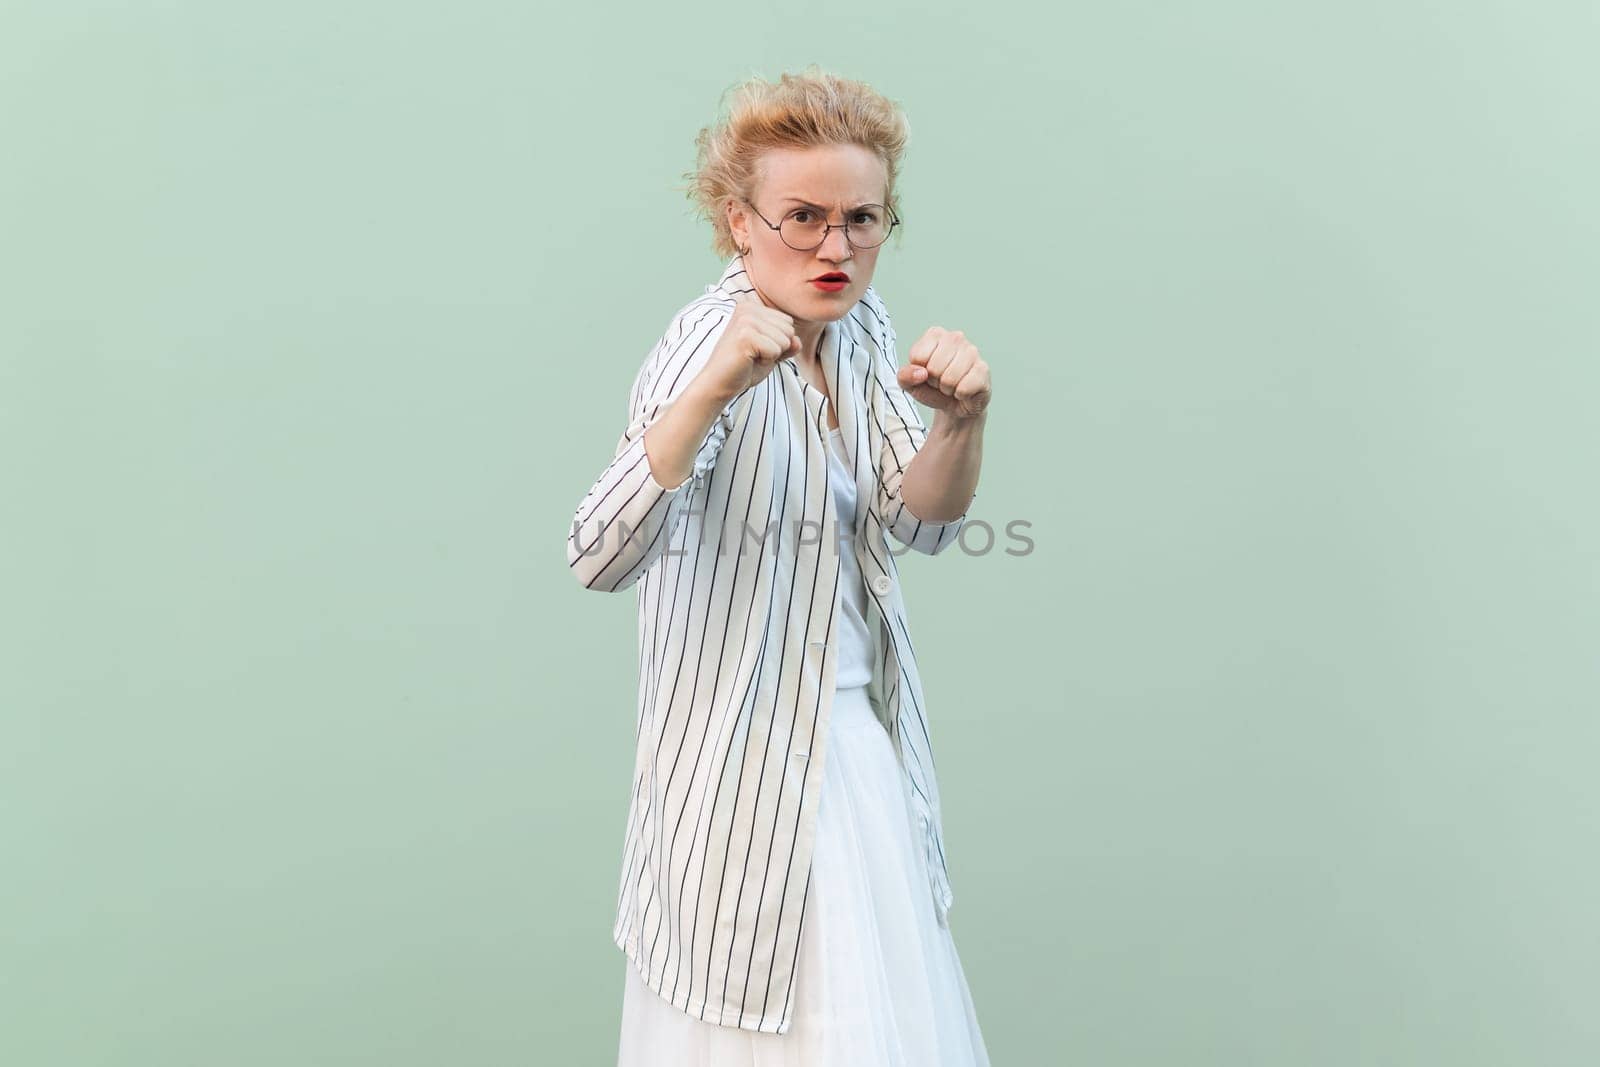 Portrait of angry aggressive attractive blonde woman wearing striped shirt and skirt, clenching fists, being ready to attack. Indoor studio shot isolated on light green background.